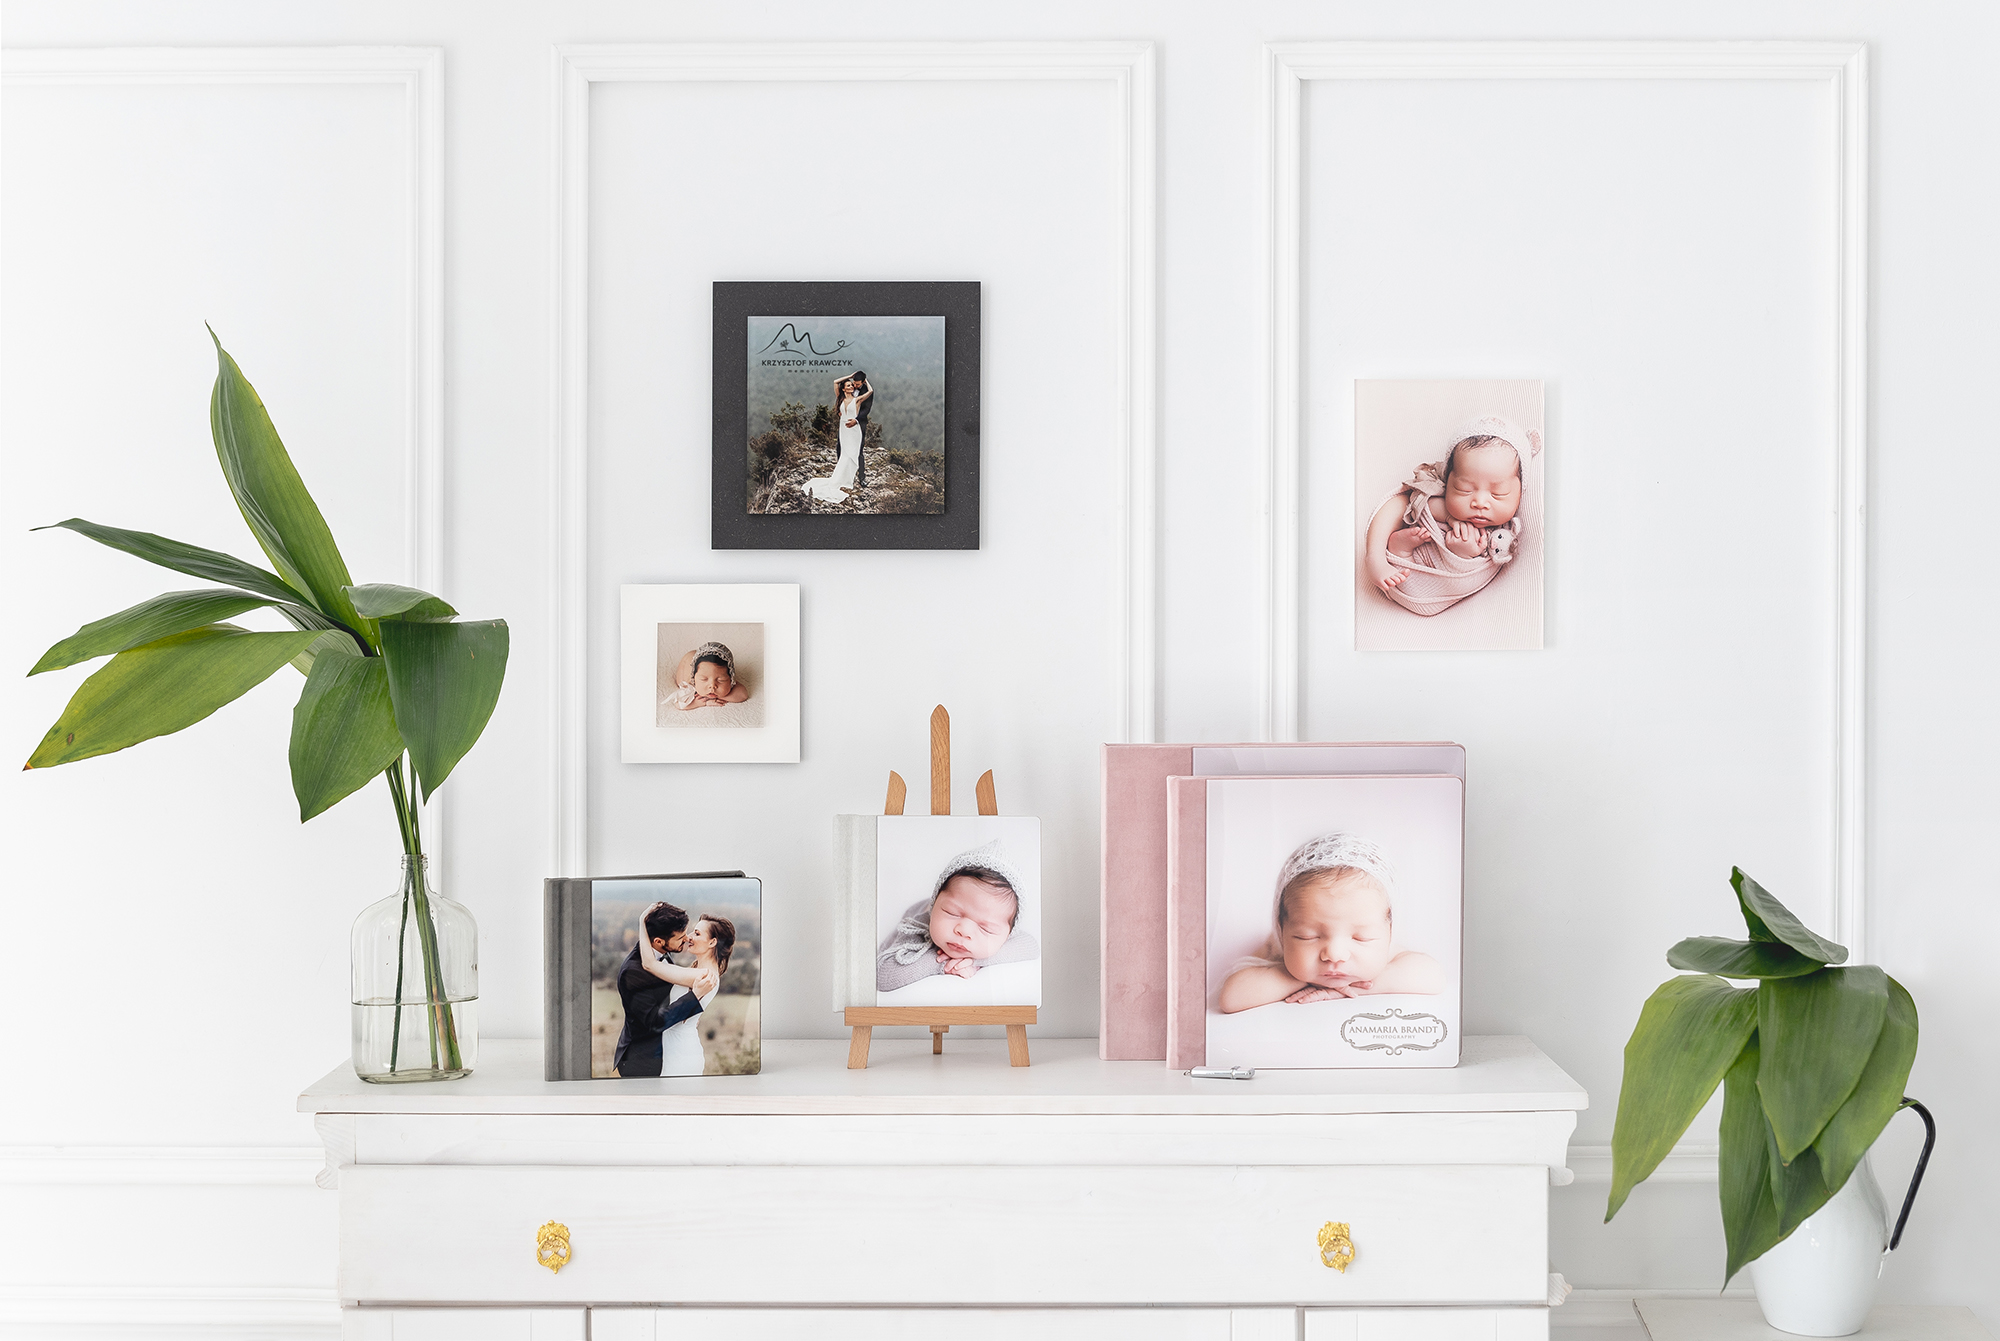 Professional Photo Albums and Wall Decor display